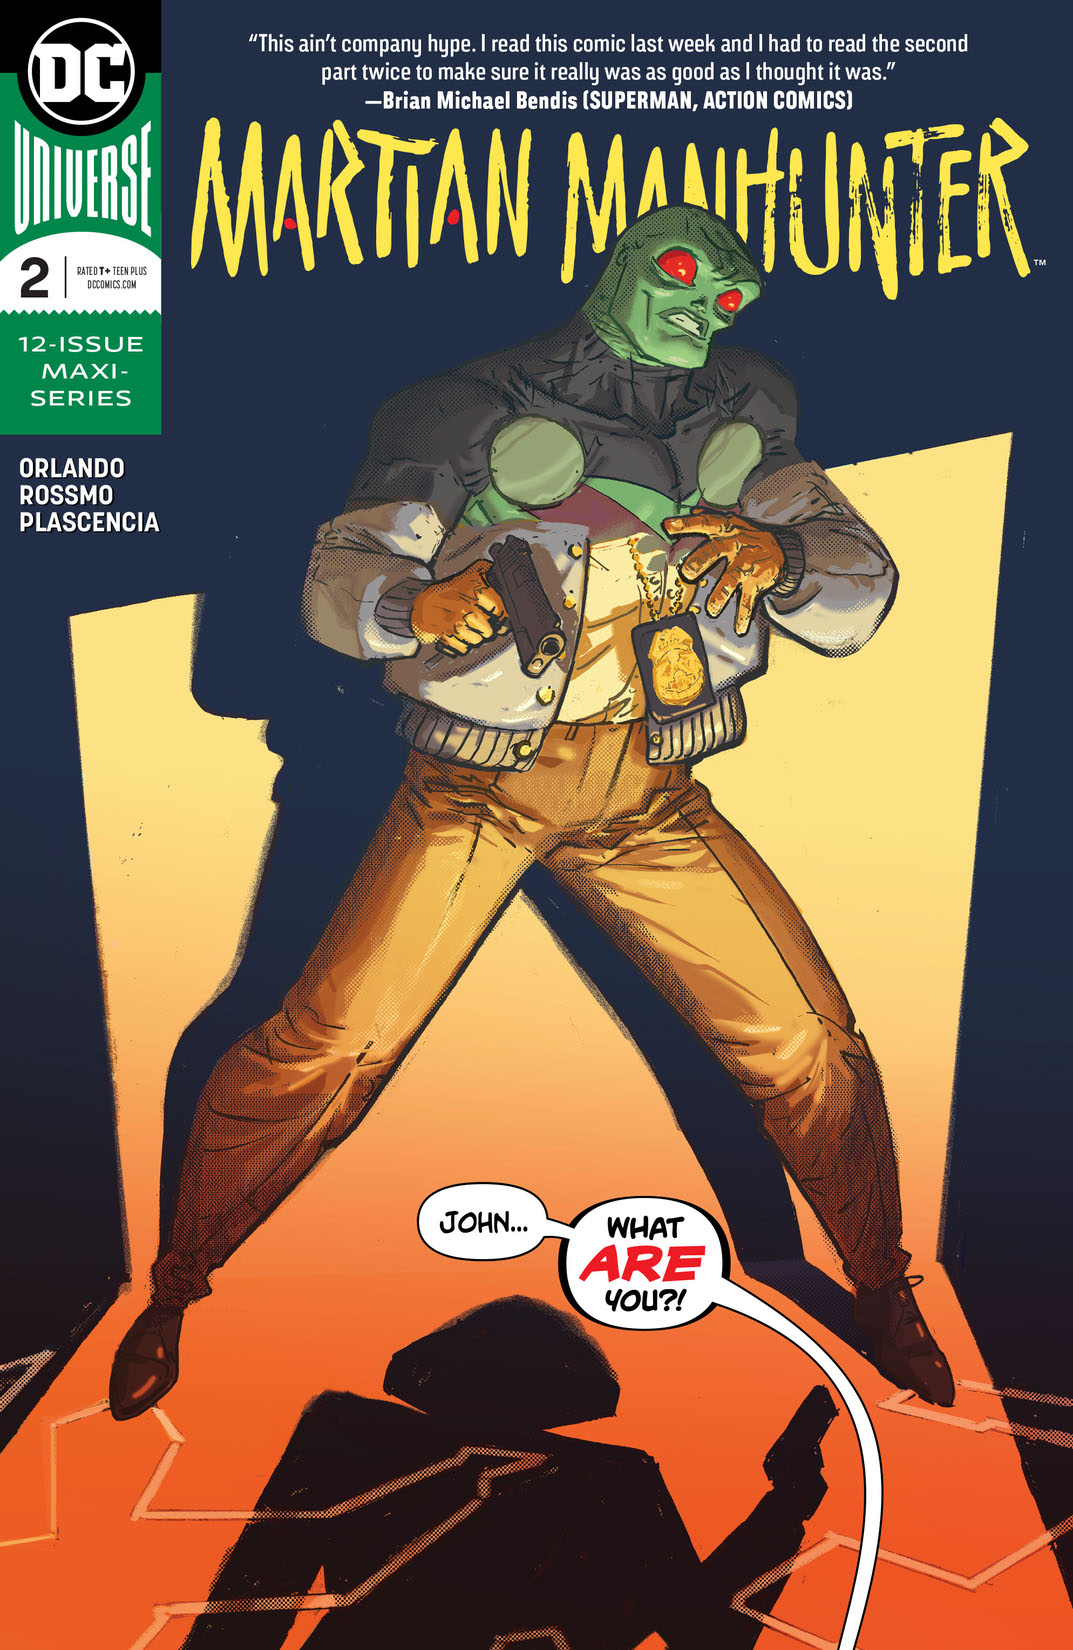 Martian Manhunter (2018-) #2 preview images